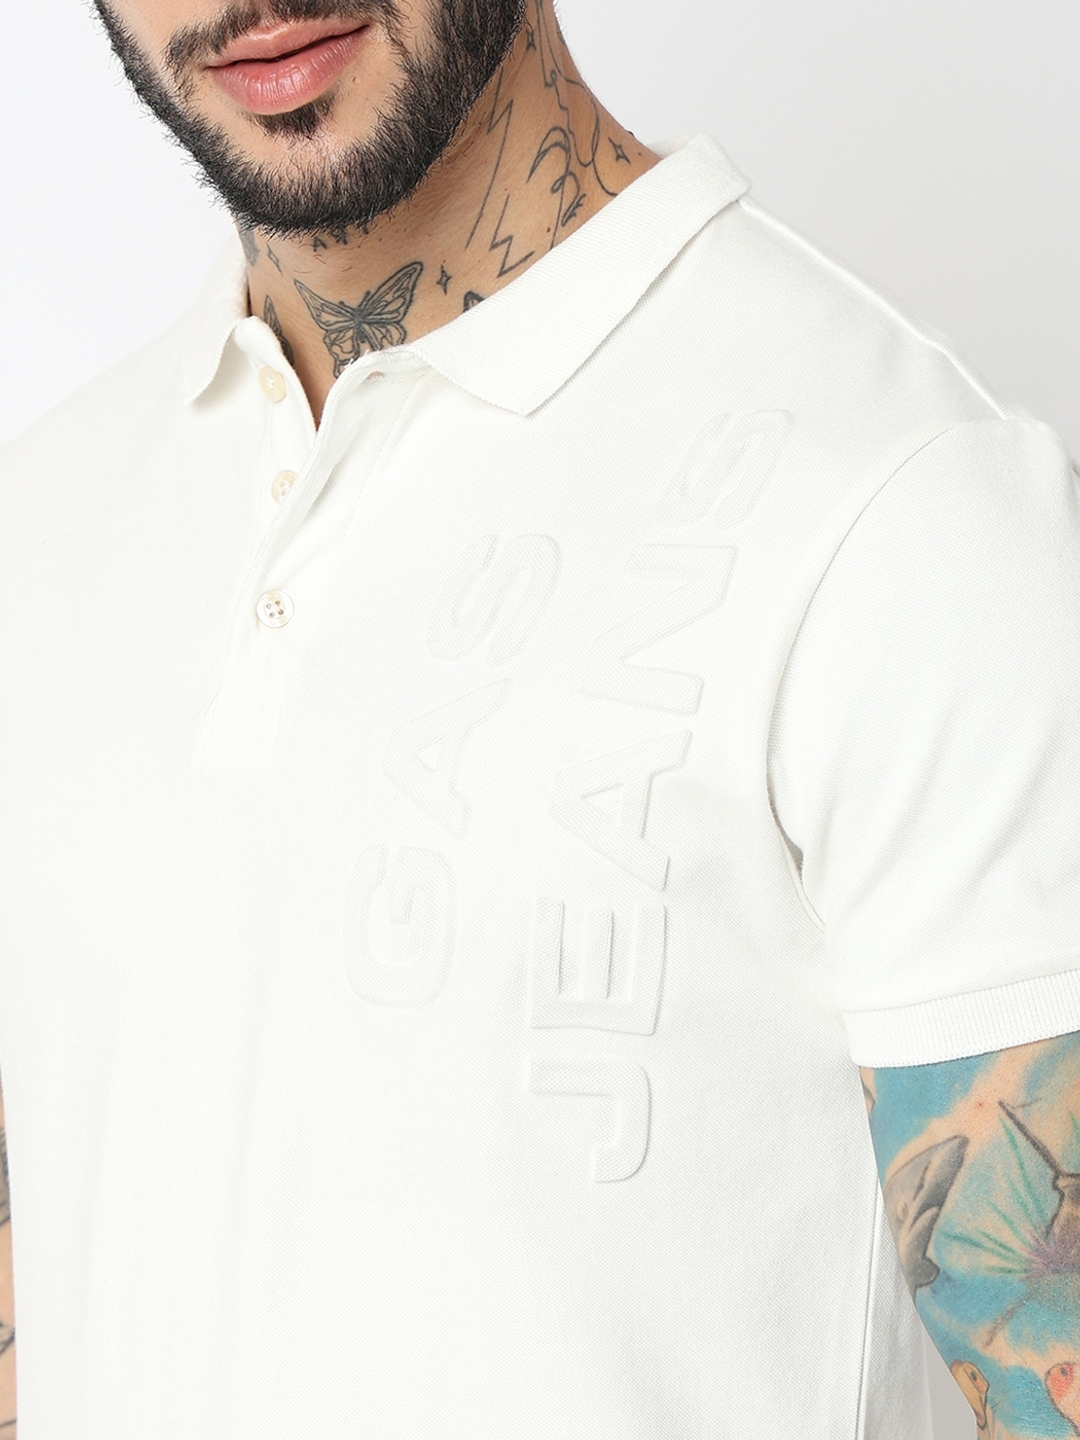 Slim Fit Half Sleeve Solid Cotton Lycra Polo T-Shirt